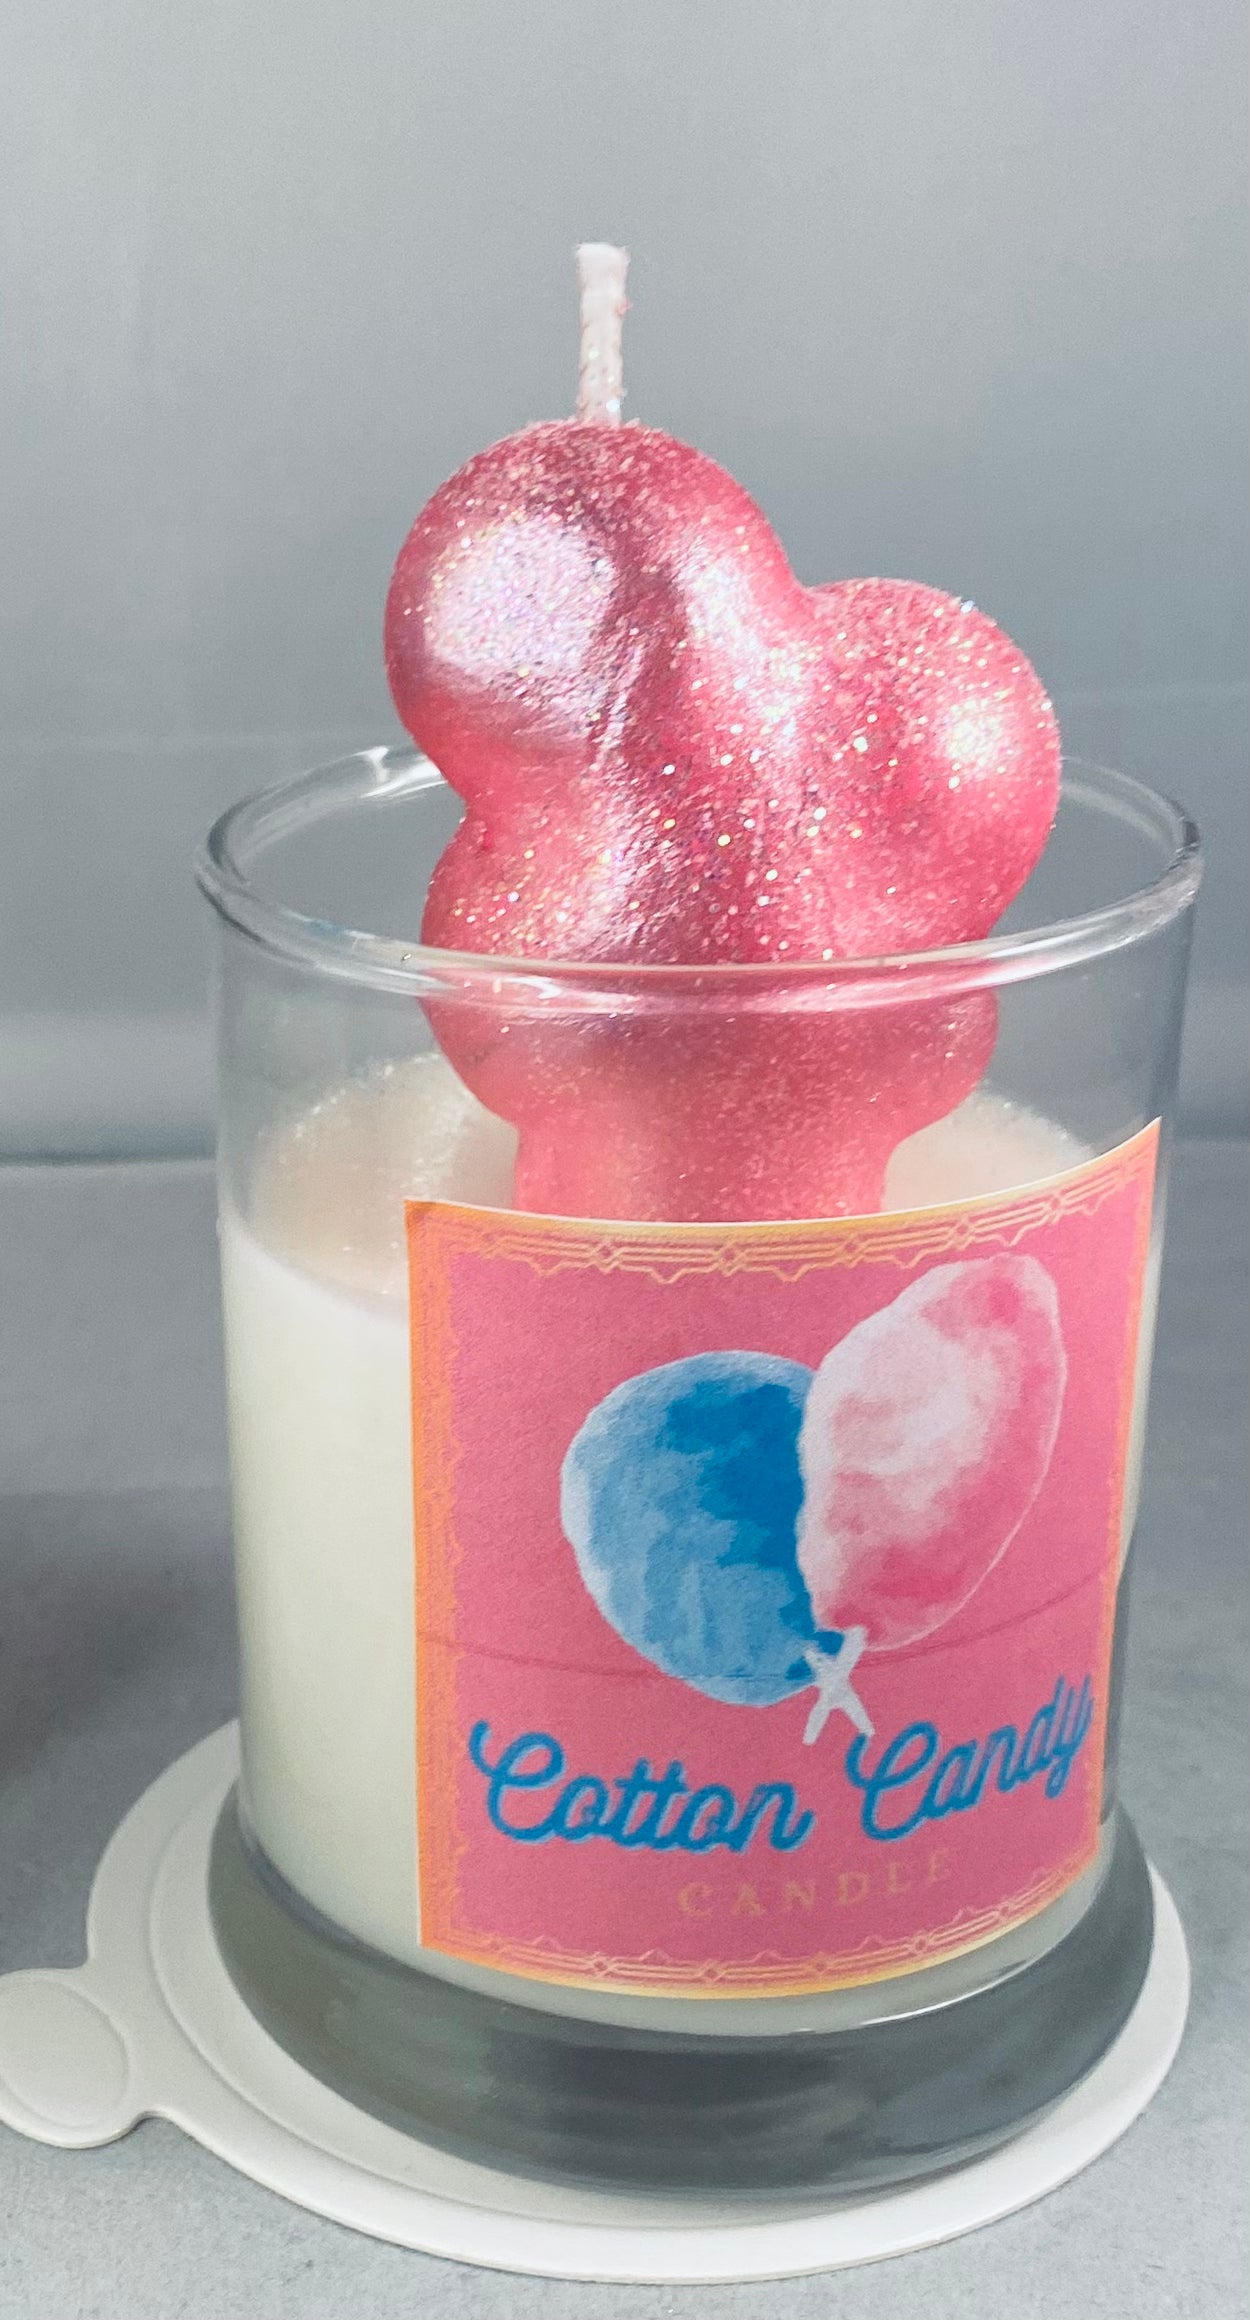 Cotton Candy - Candle